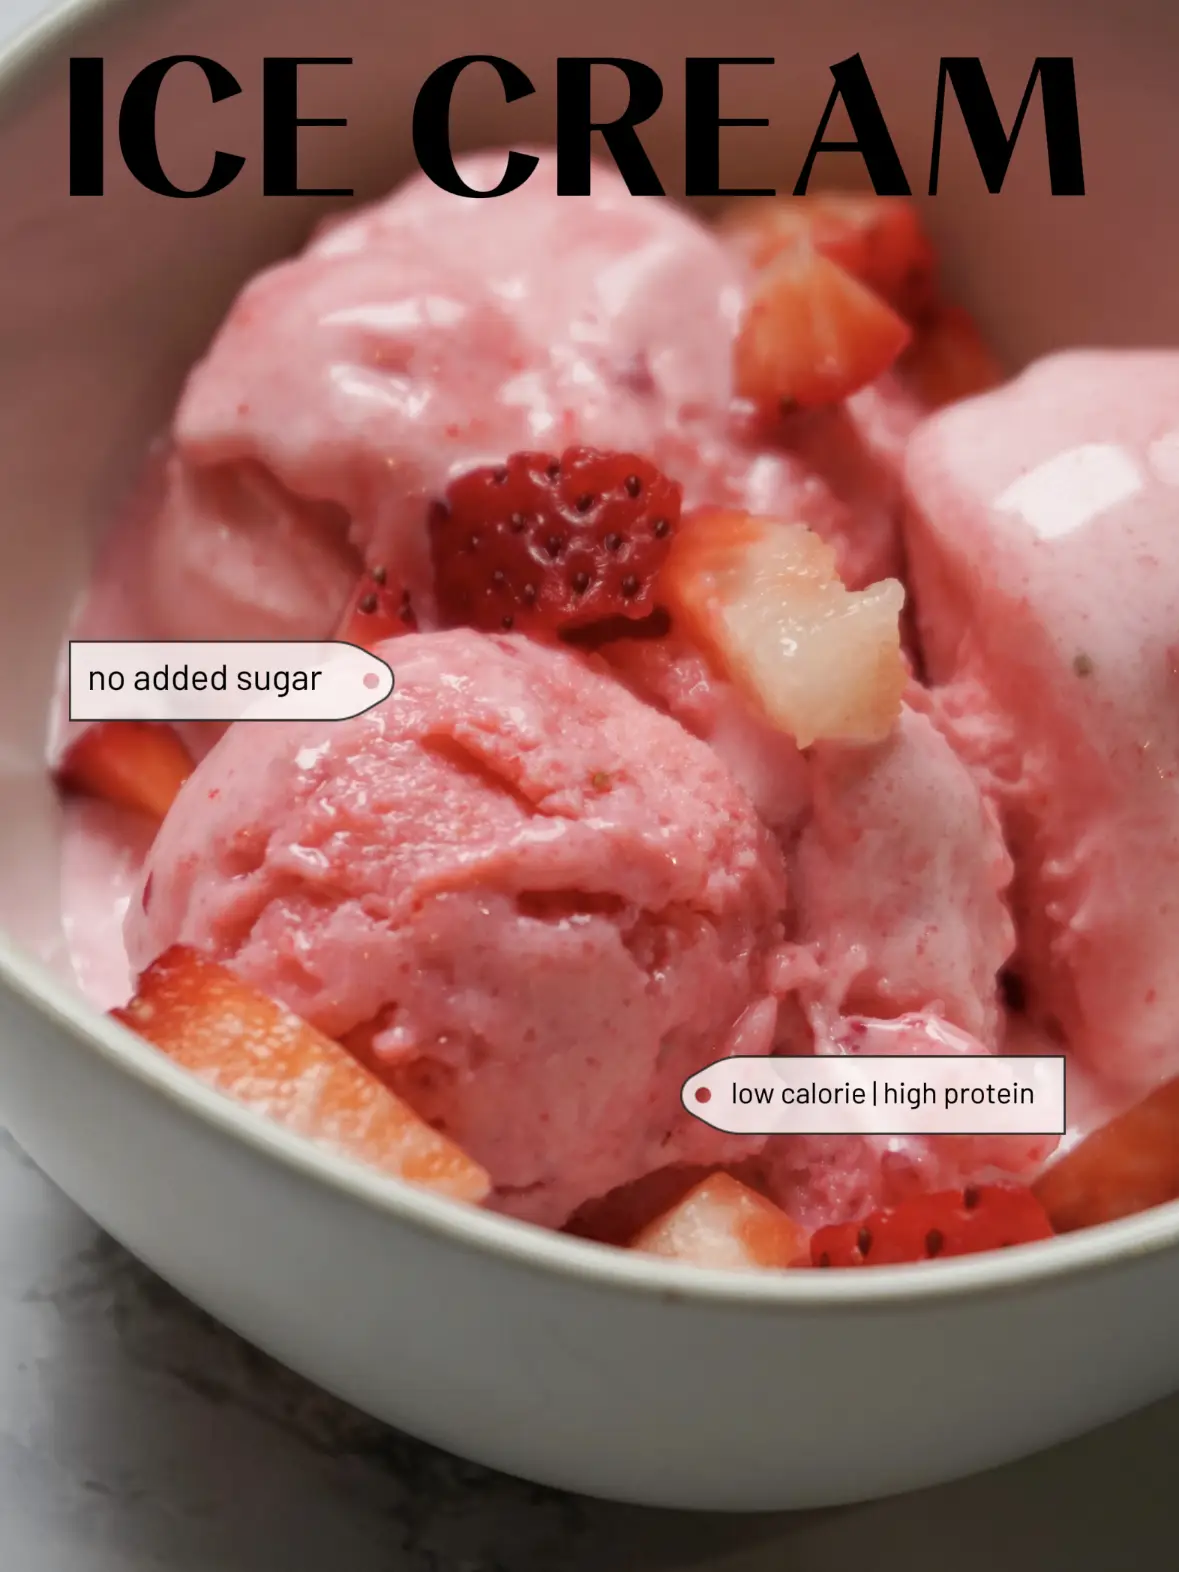 Strawberry Protein Ice Cream 🍓, Gallery posted by Meg Dopp